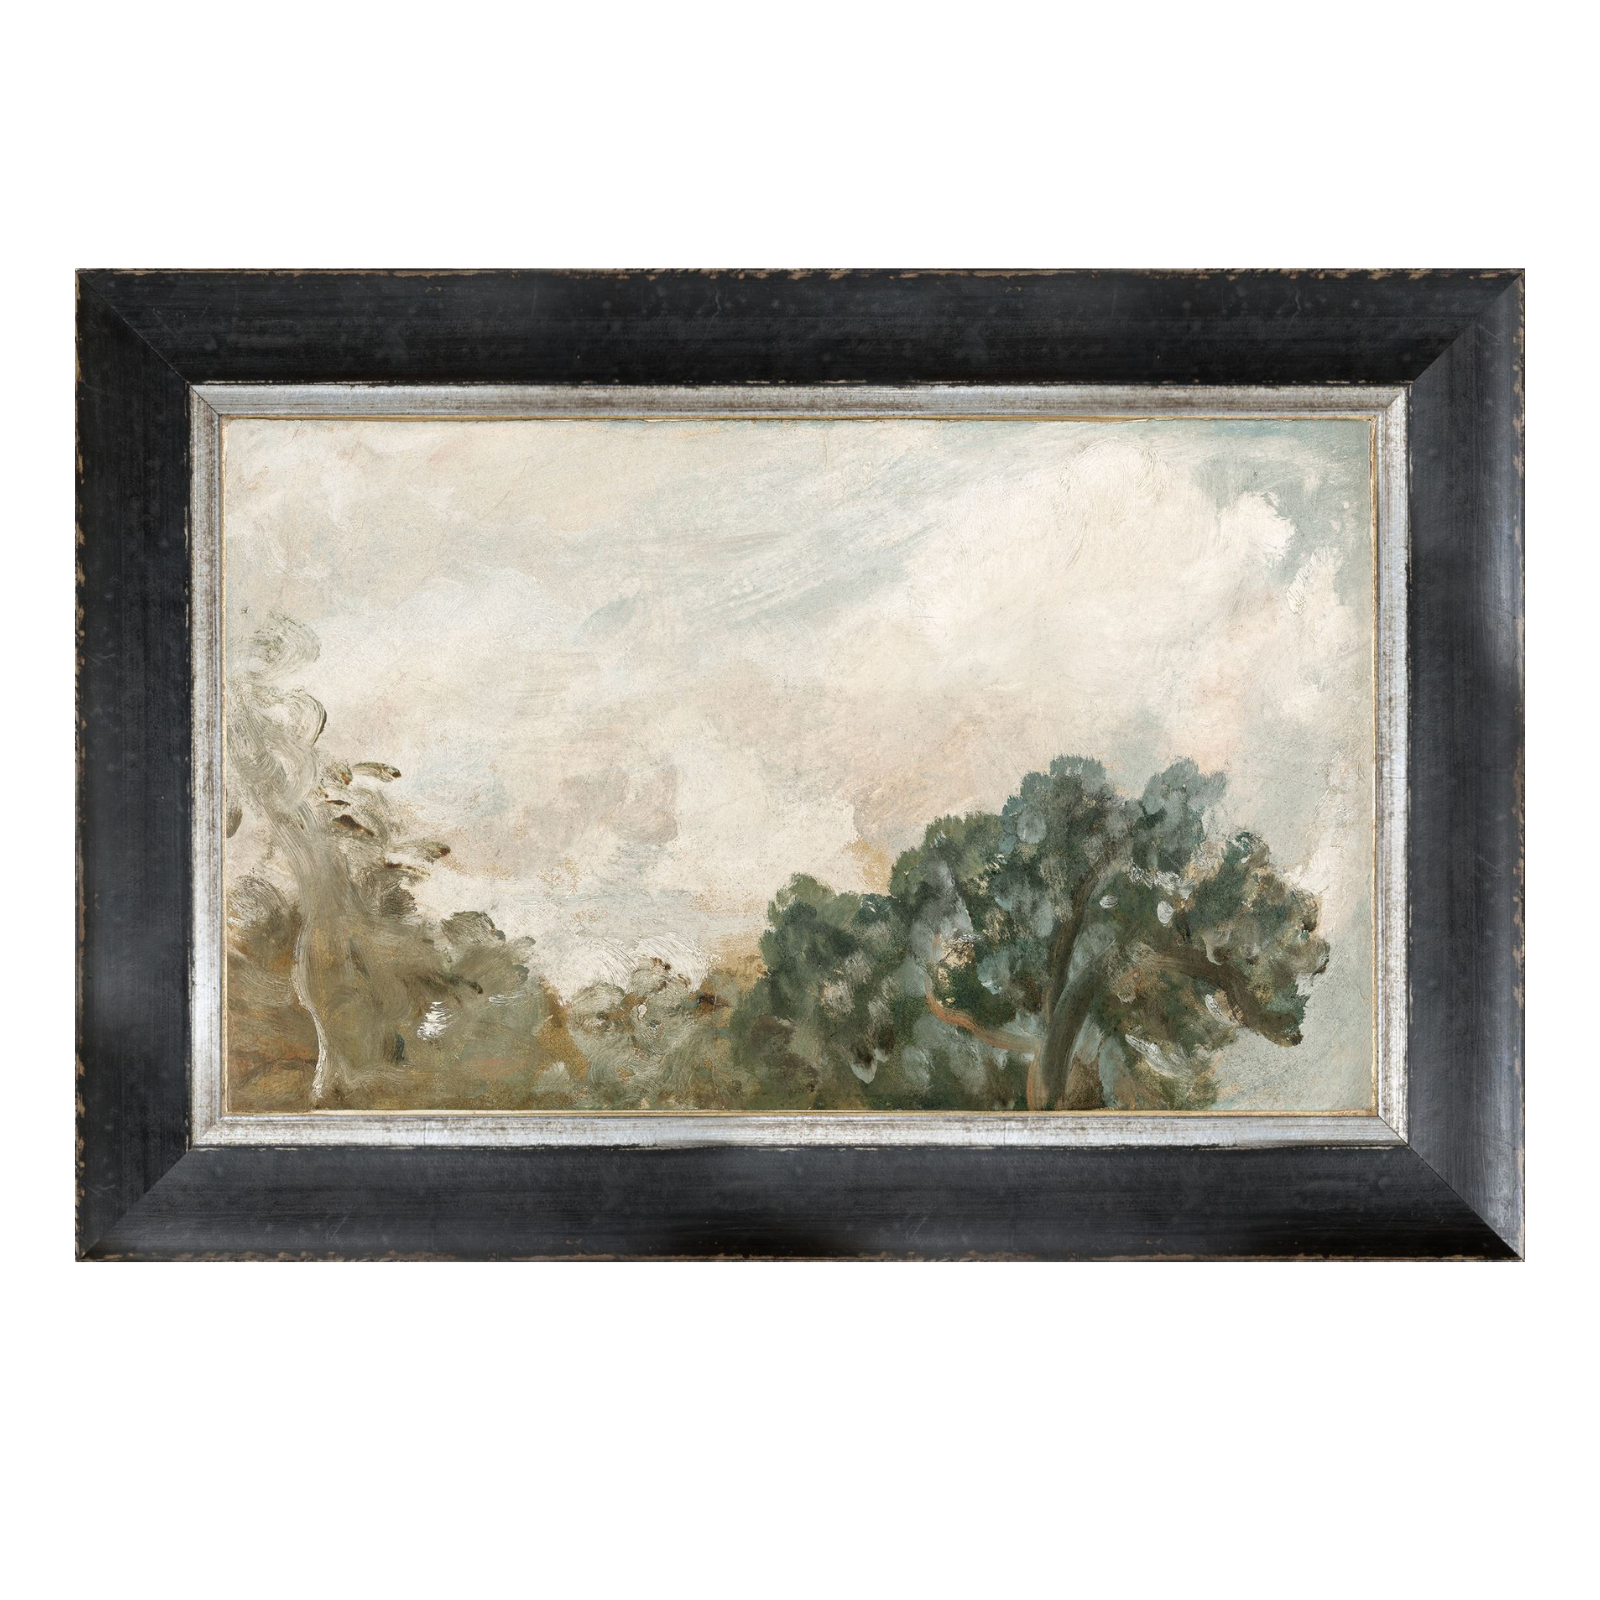 “View of Trees Petite Scape” Framed Art Print